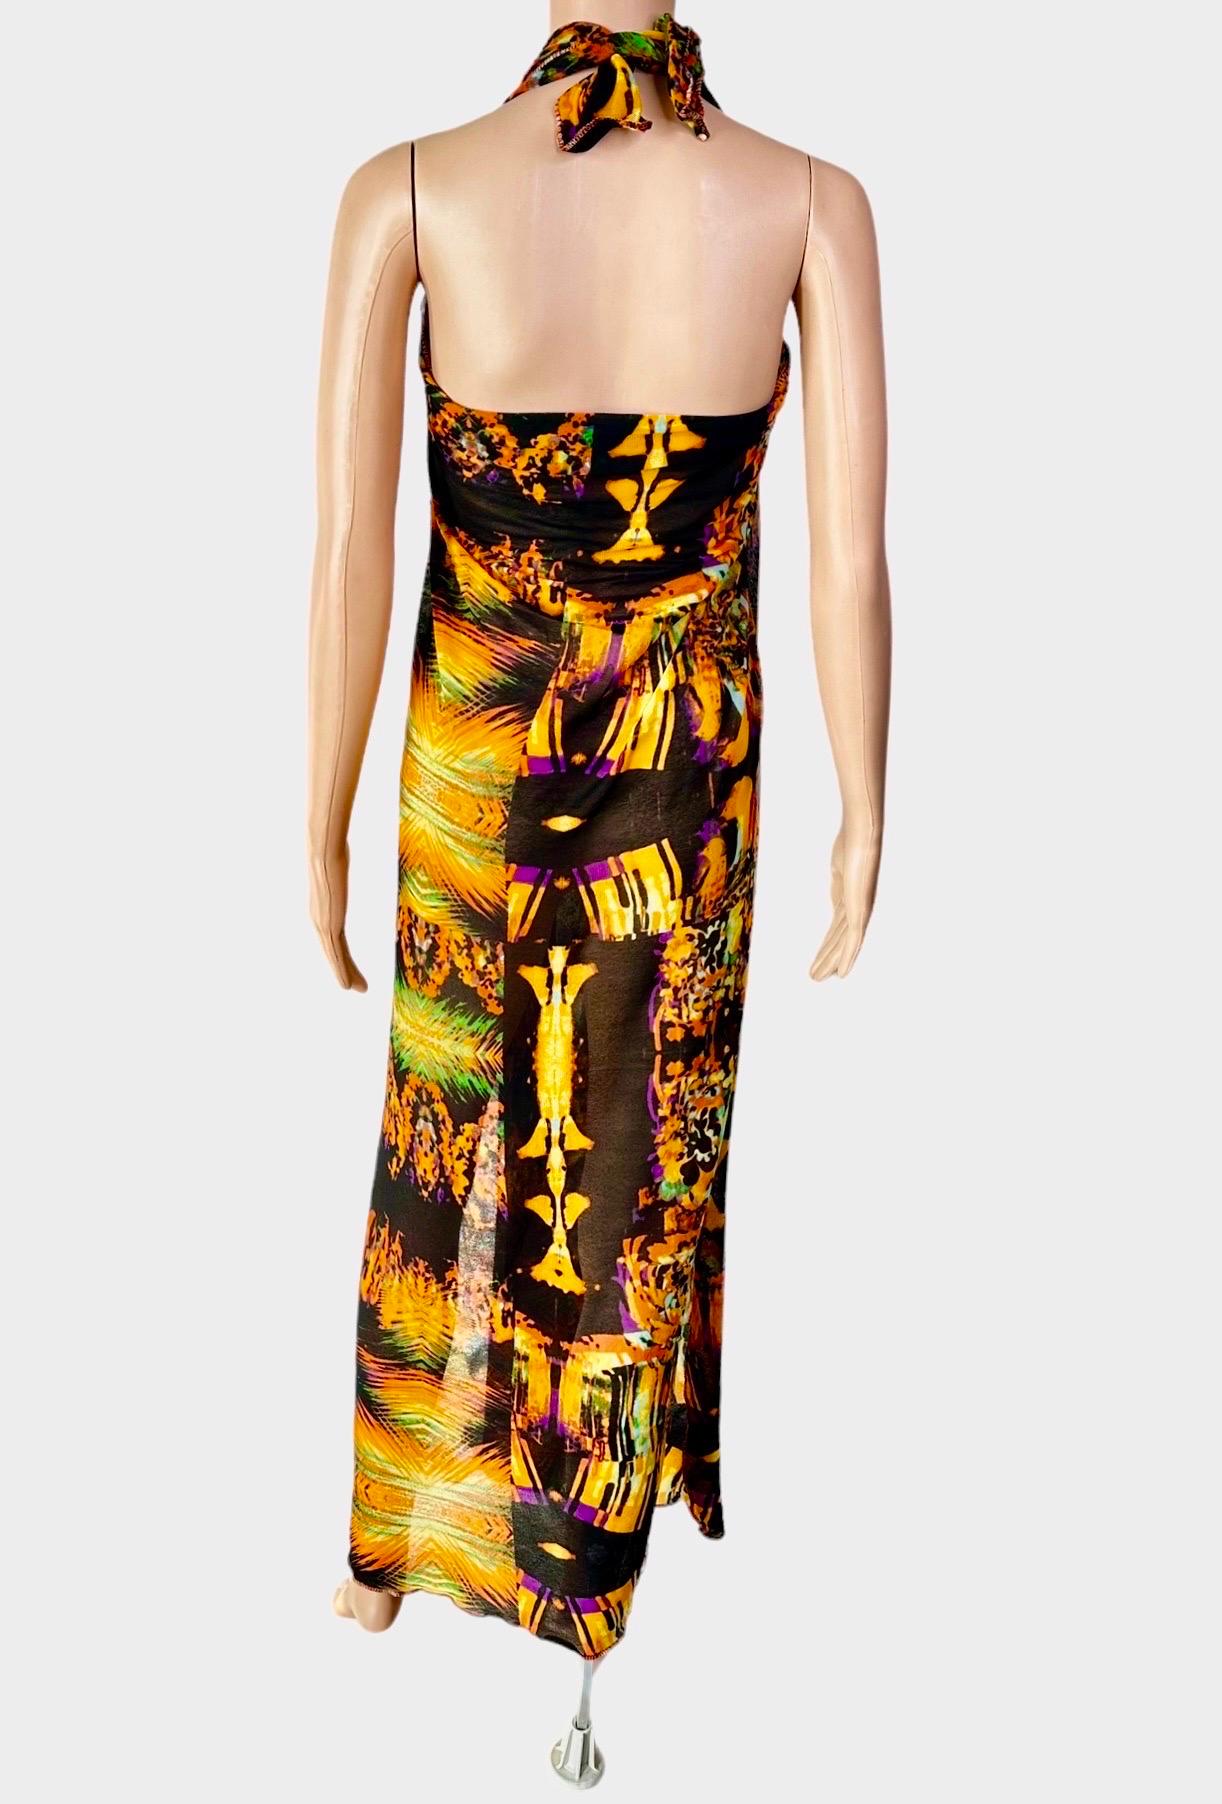 Jean Paul Gaultier S/S 2000 Psychedelic Print Mesh Wrap Dress Scarf Sarong Pareo 7